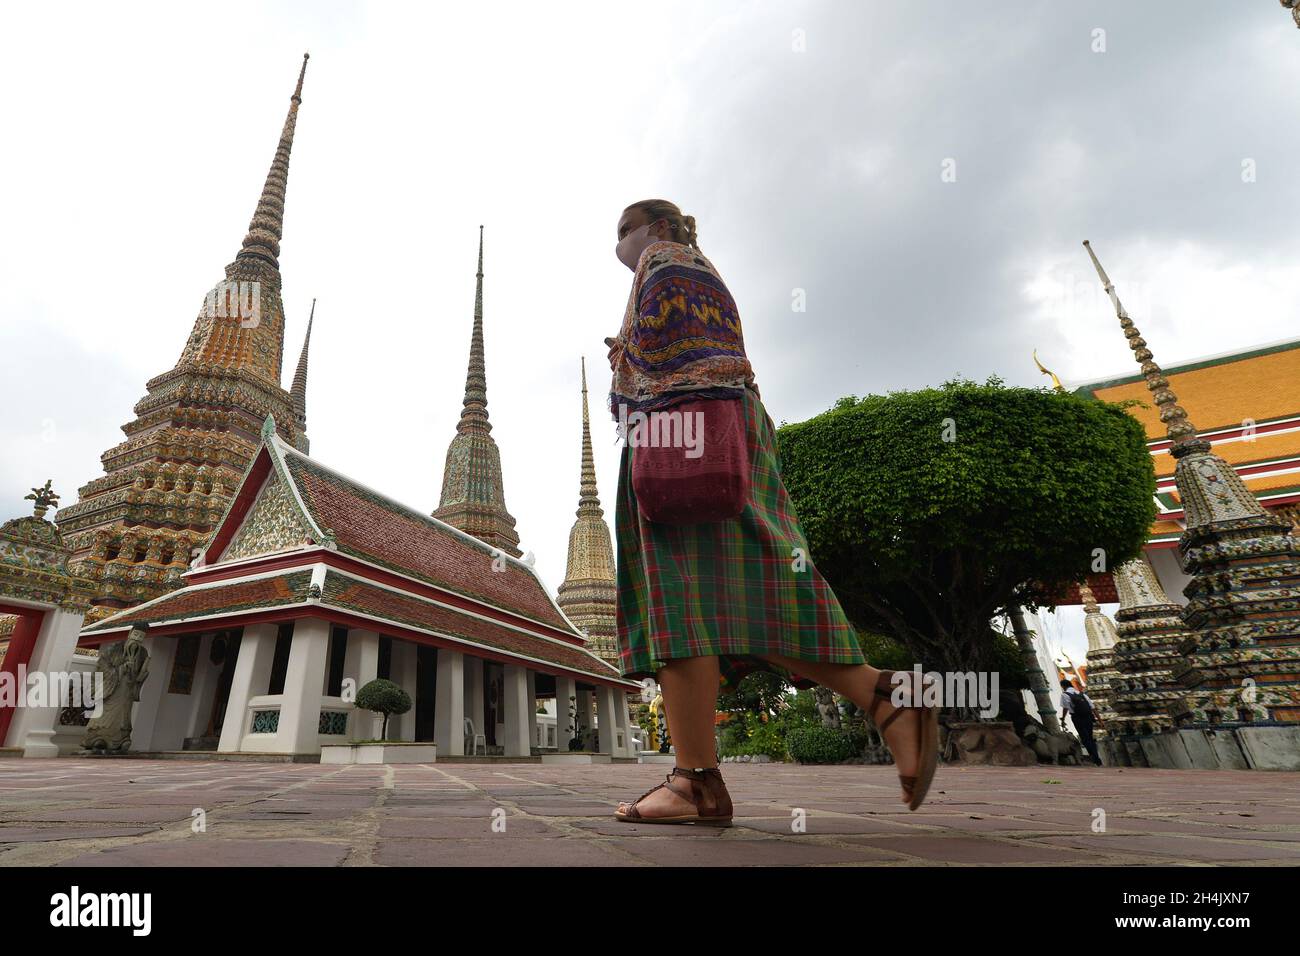 Bangkok, Thailand. 2nd Nov, 2021. A tourist is seen at the Wat Pho temple in Bangkok, Thailand, on Nov. 2, 2021. Thailand on Monday reopened to vaccinated visitors from more than 60 countries and regions amid efforts to revive its pandemic-battered economy. Credit: Rachen Sageamsak/Xinhua/Alamy Live News Stock Photo